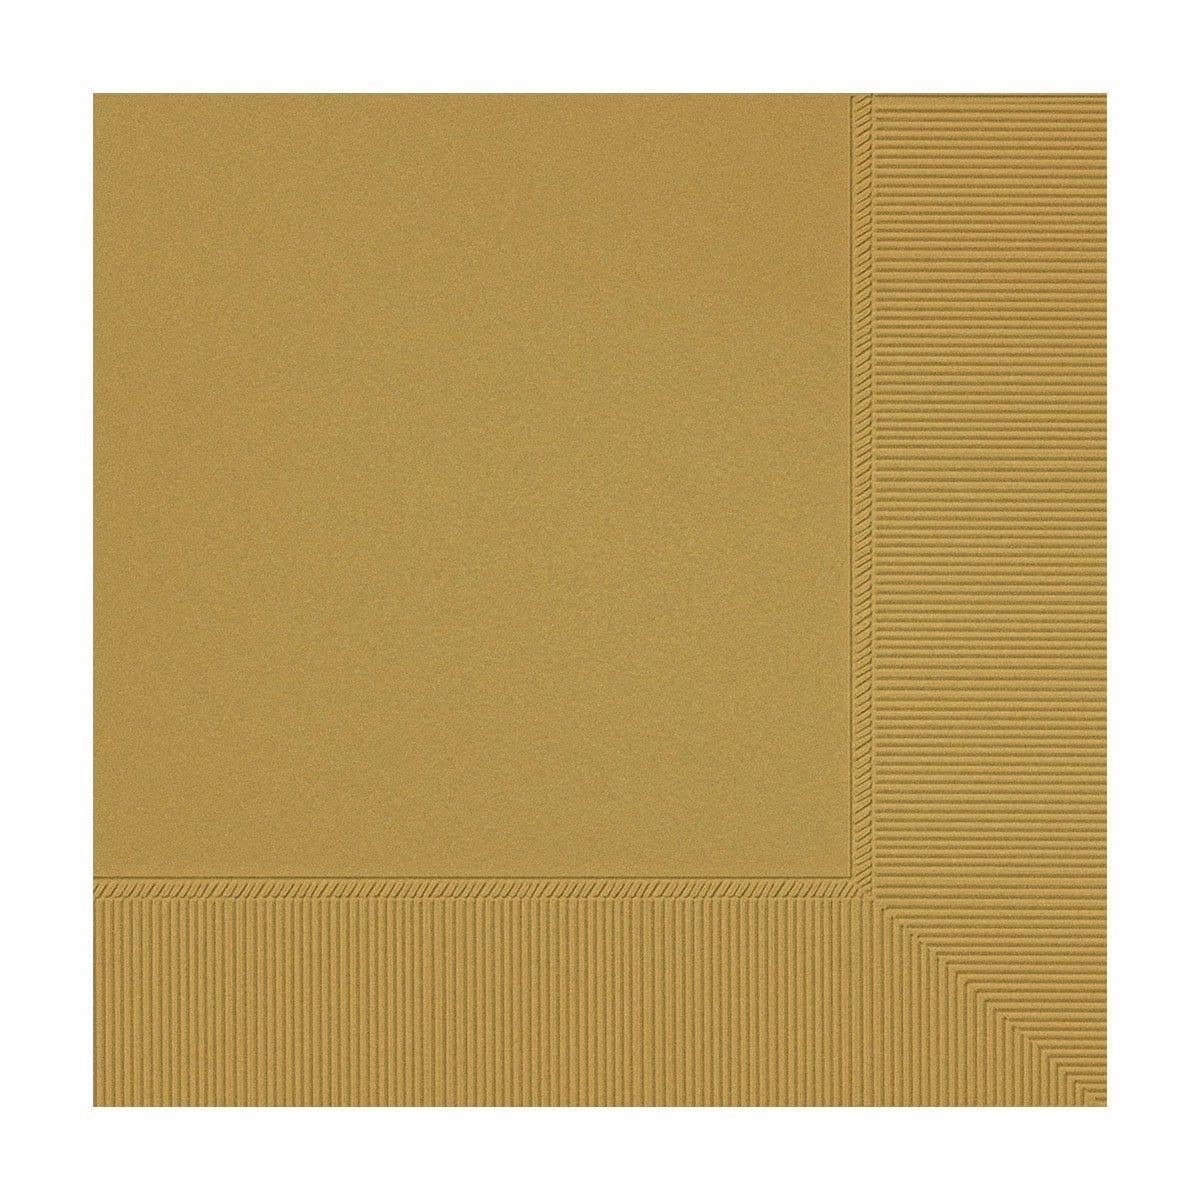 Buy Plasticware Gold Beverage Napkins, 40 Count sold at Party Expert